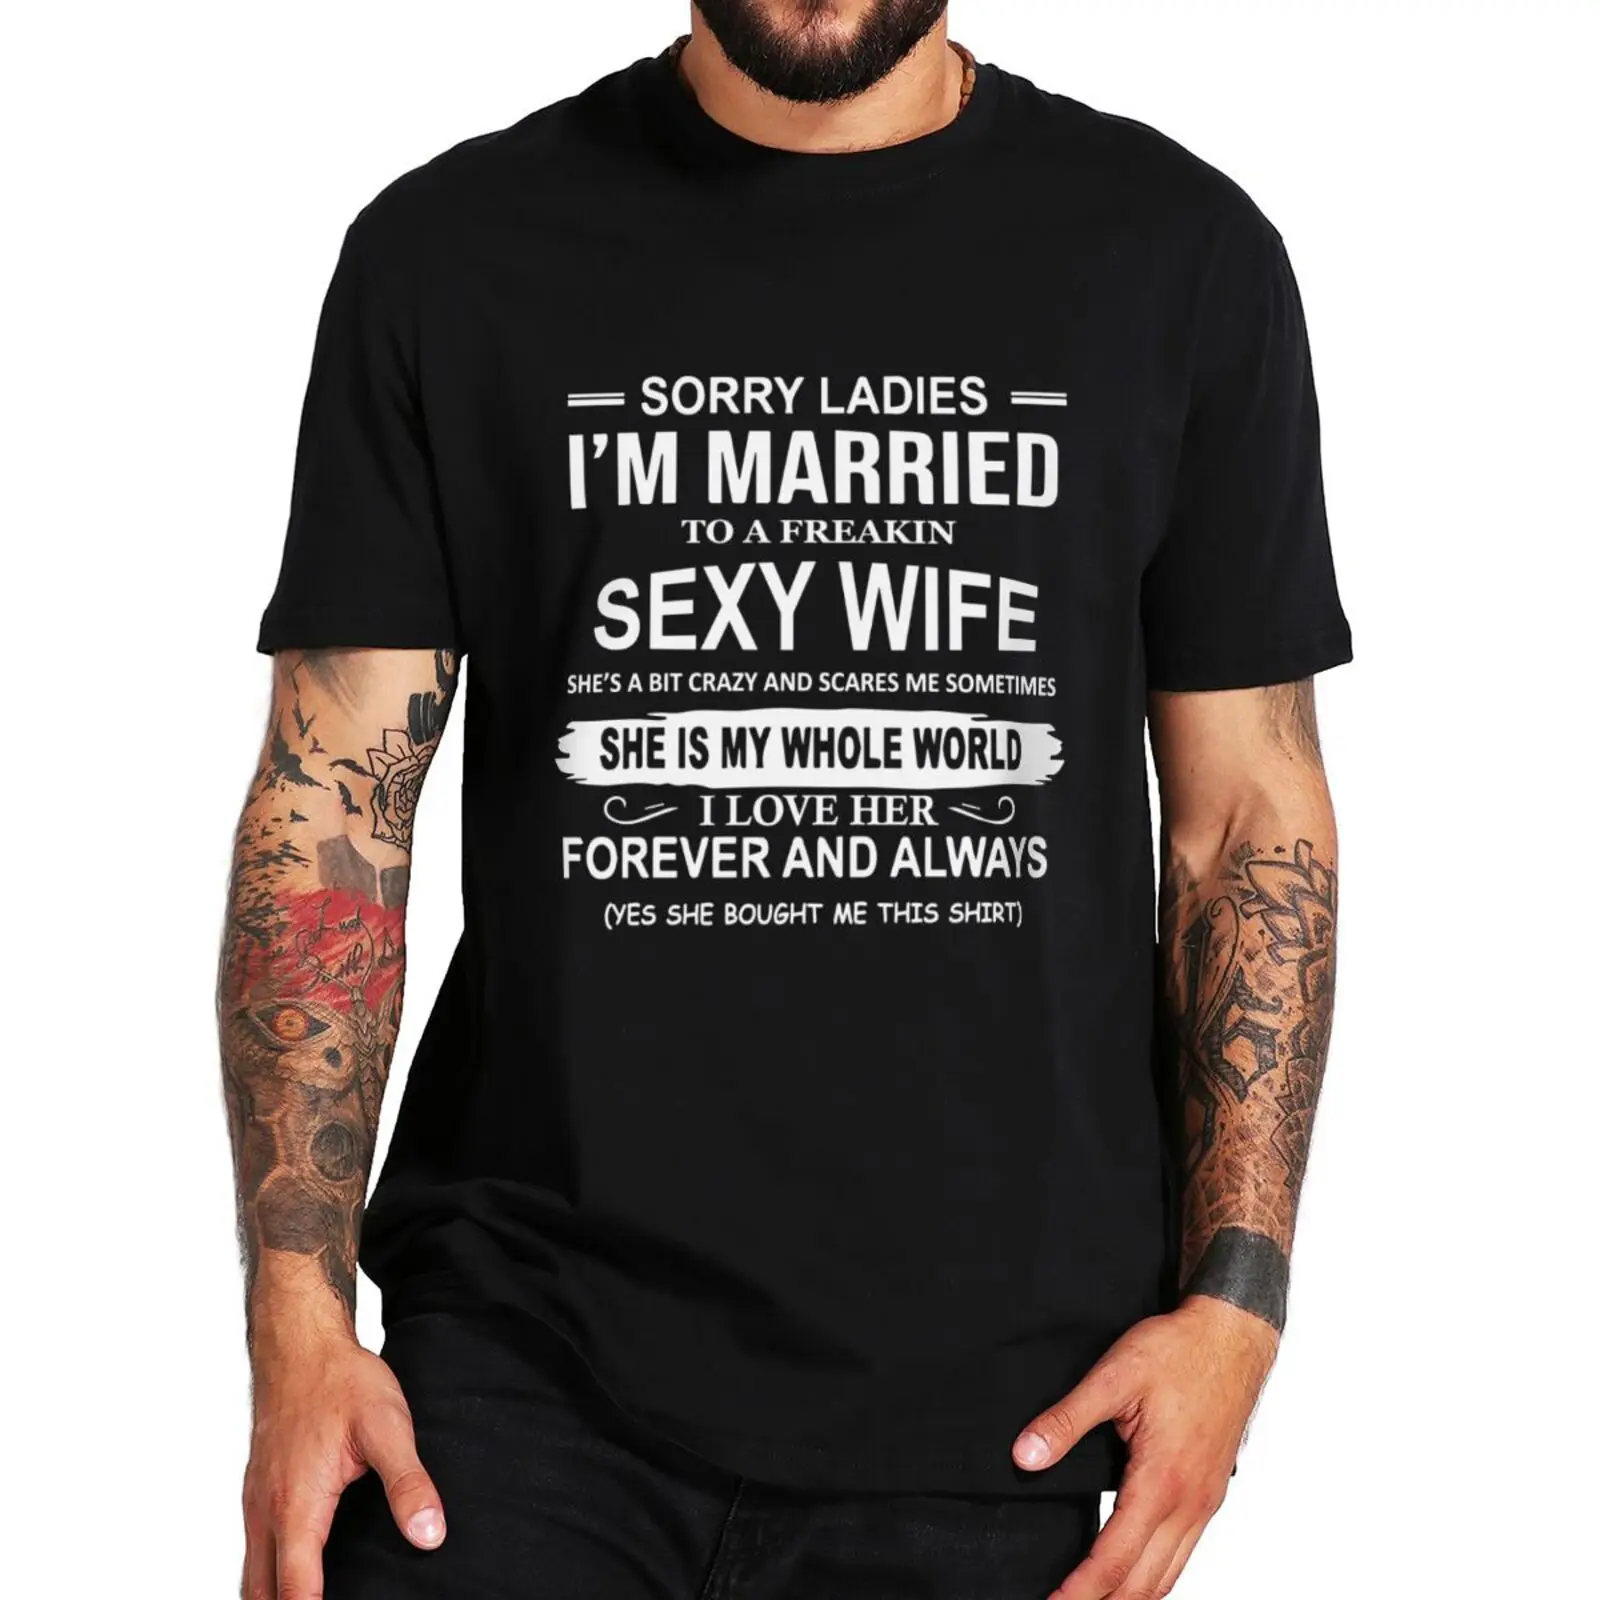 

Sorry Ladies I'm Married To A Sexy Wife T Shirt Funny Gift Husband Jokes Tee Tops EU Size Cotton Unisex Casual O-neck T-shirts